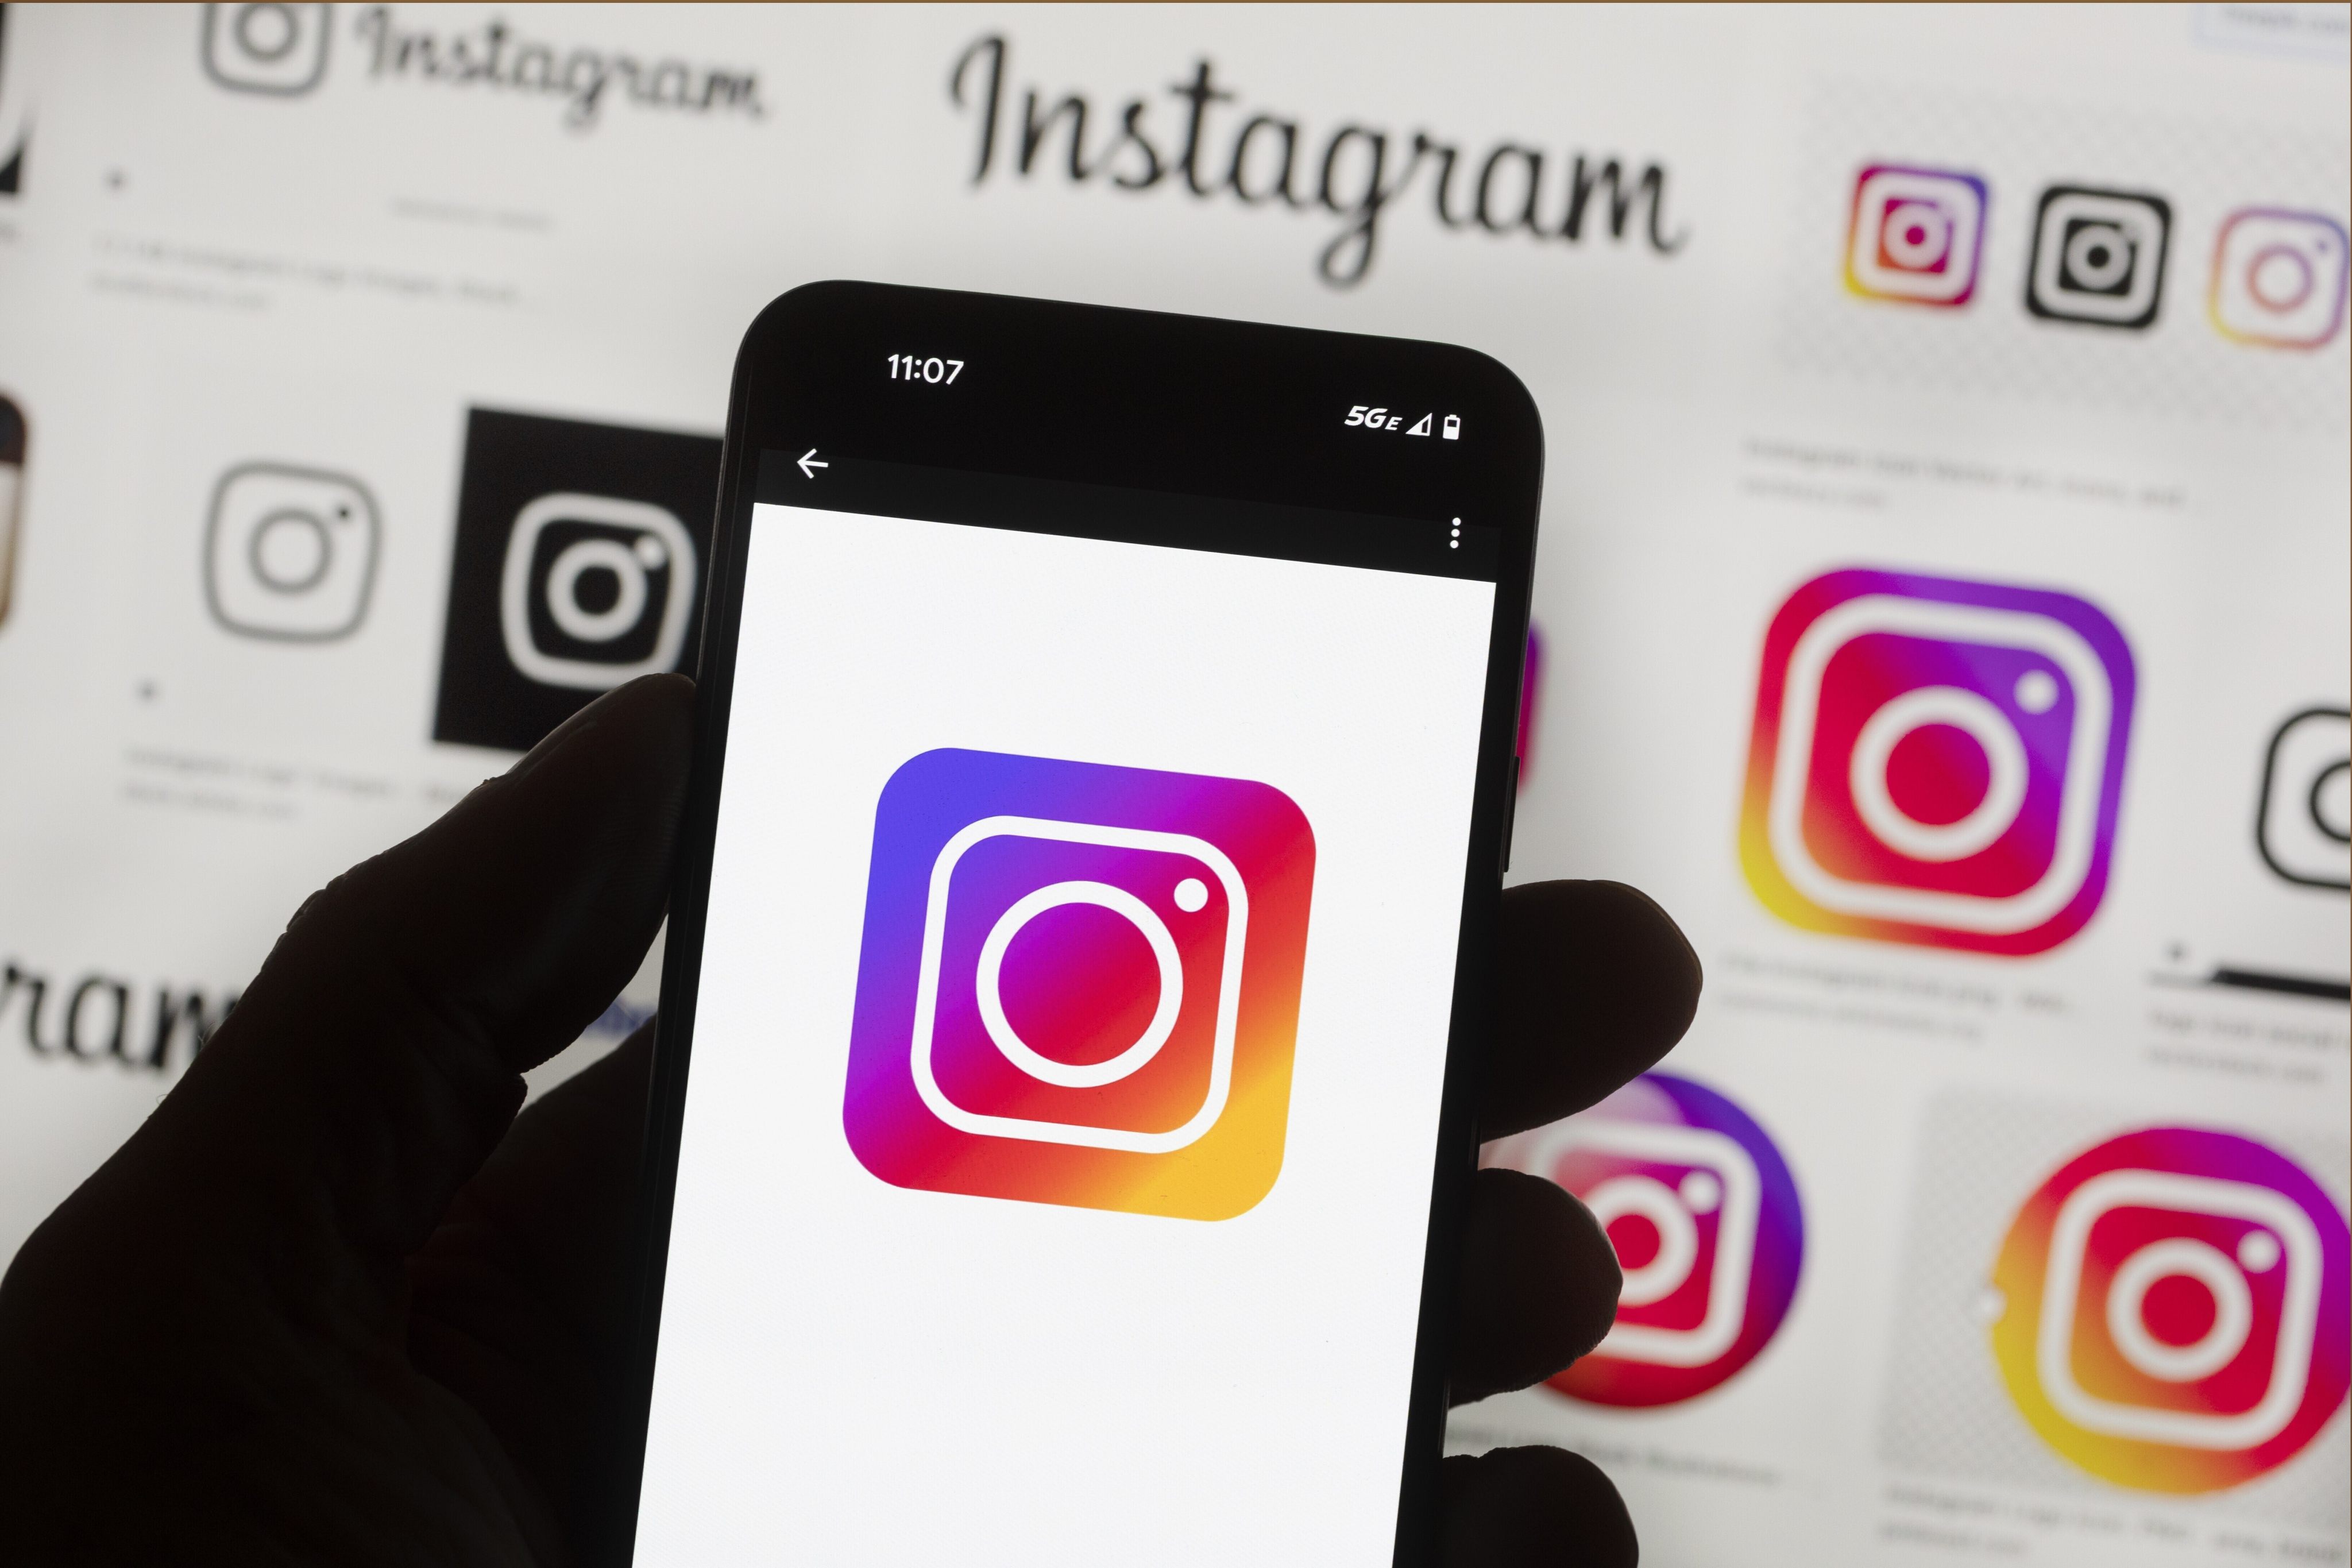 Instagram users have become the latest target of online scams, police warn. Photo: AP